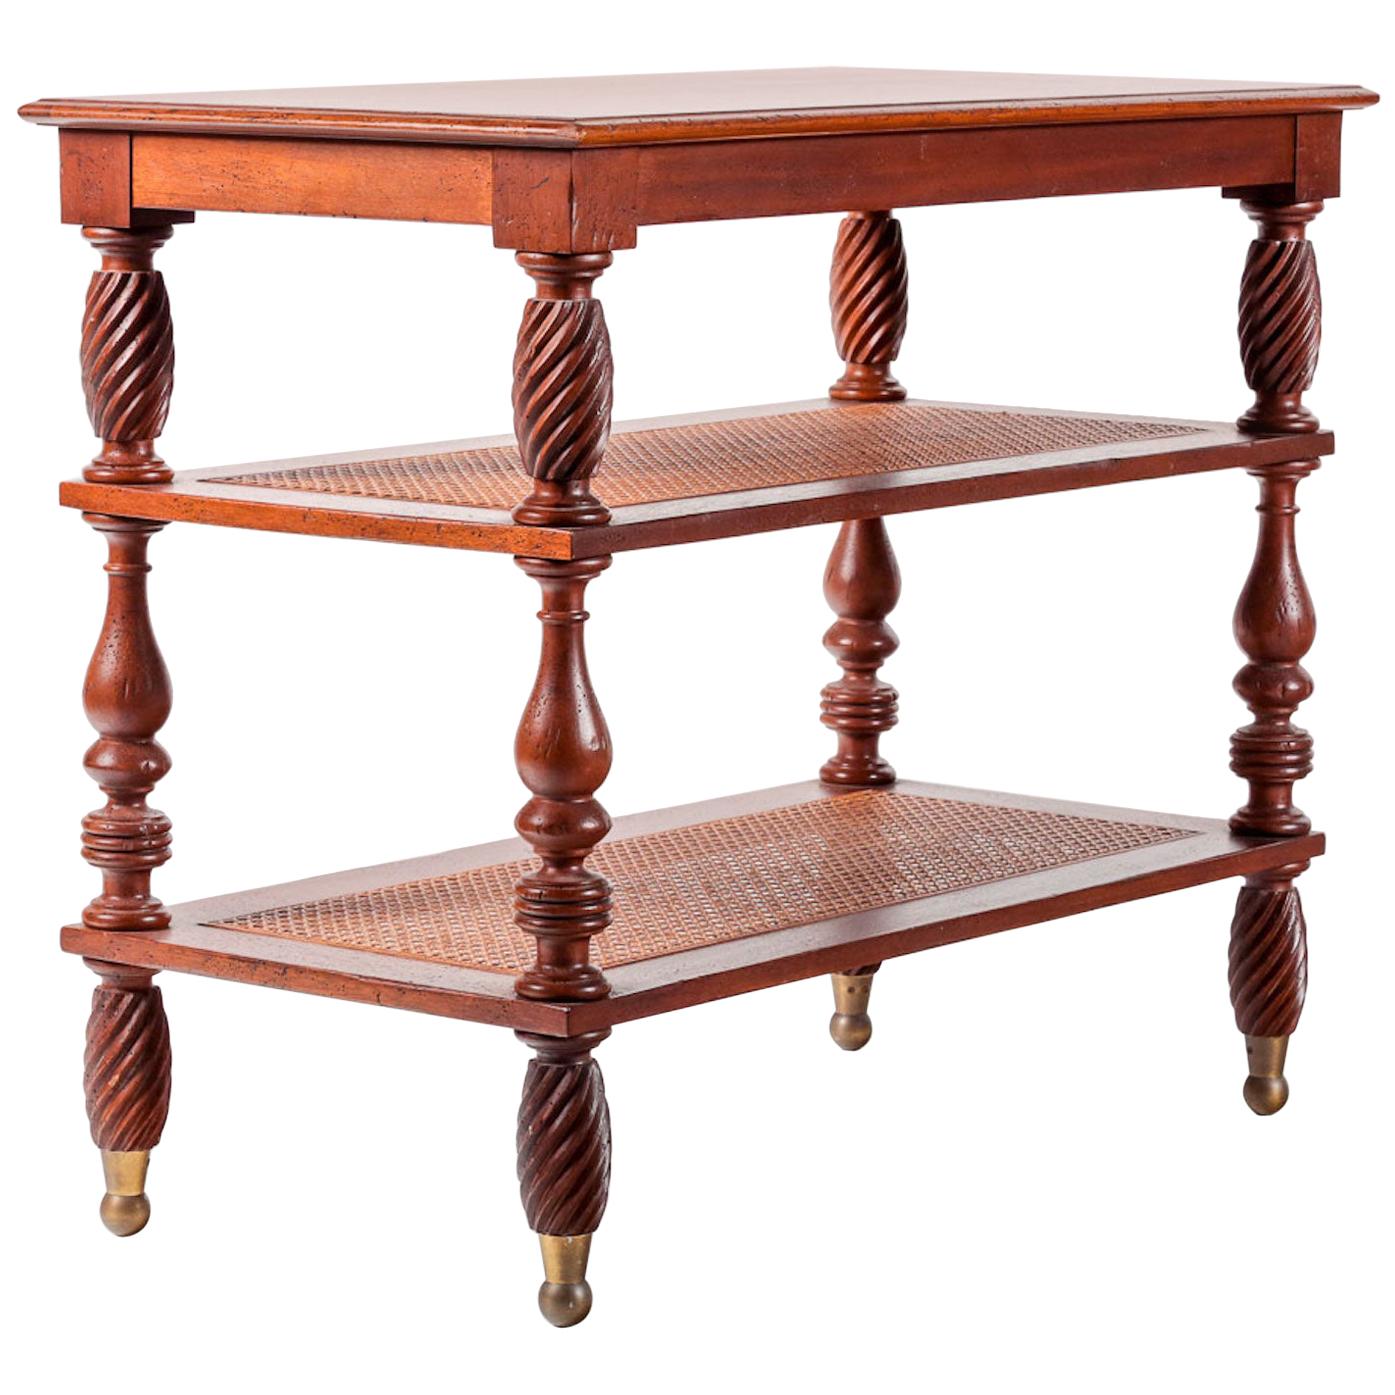 Vintage Mahogany Étagère / Side Table, West Indies Style with Woven Cane Shelves For Sale